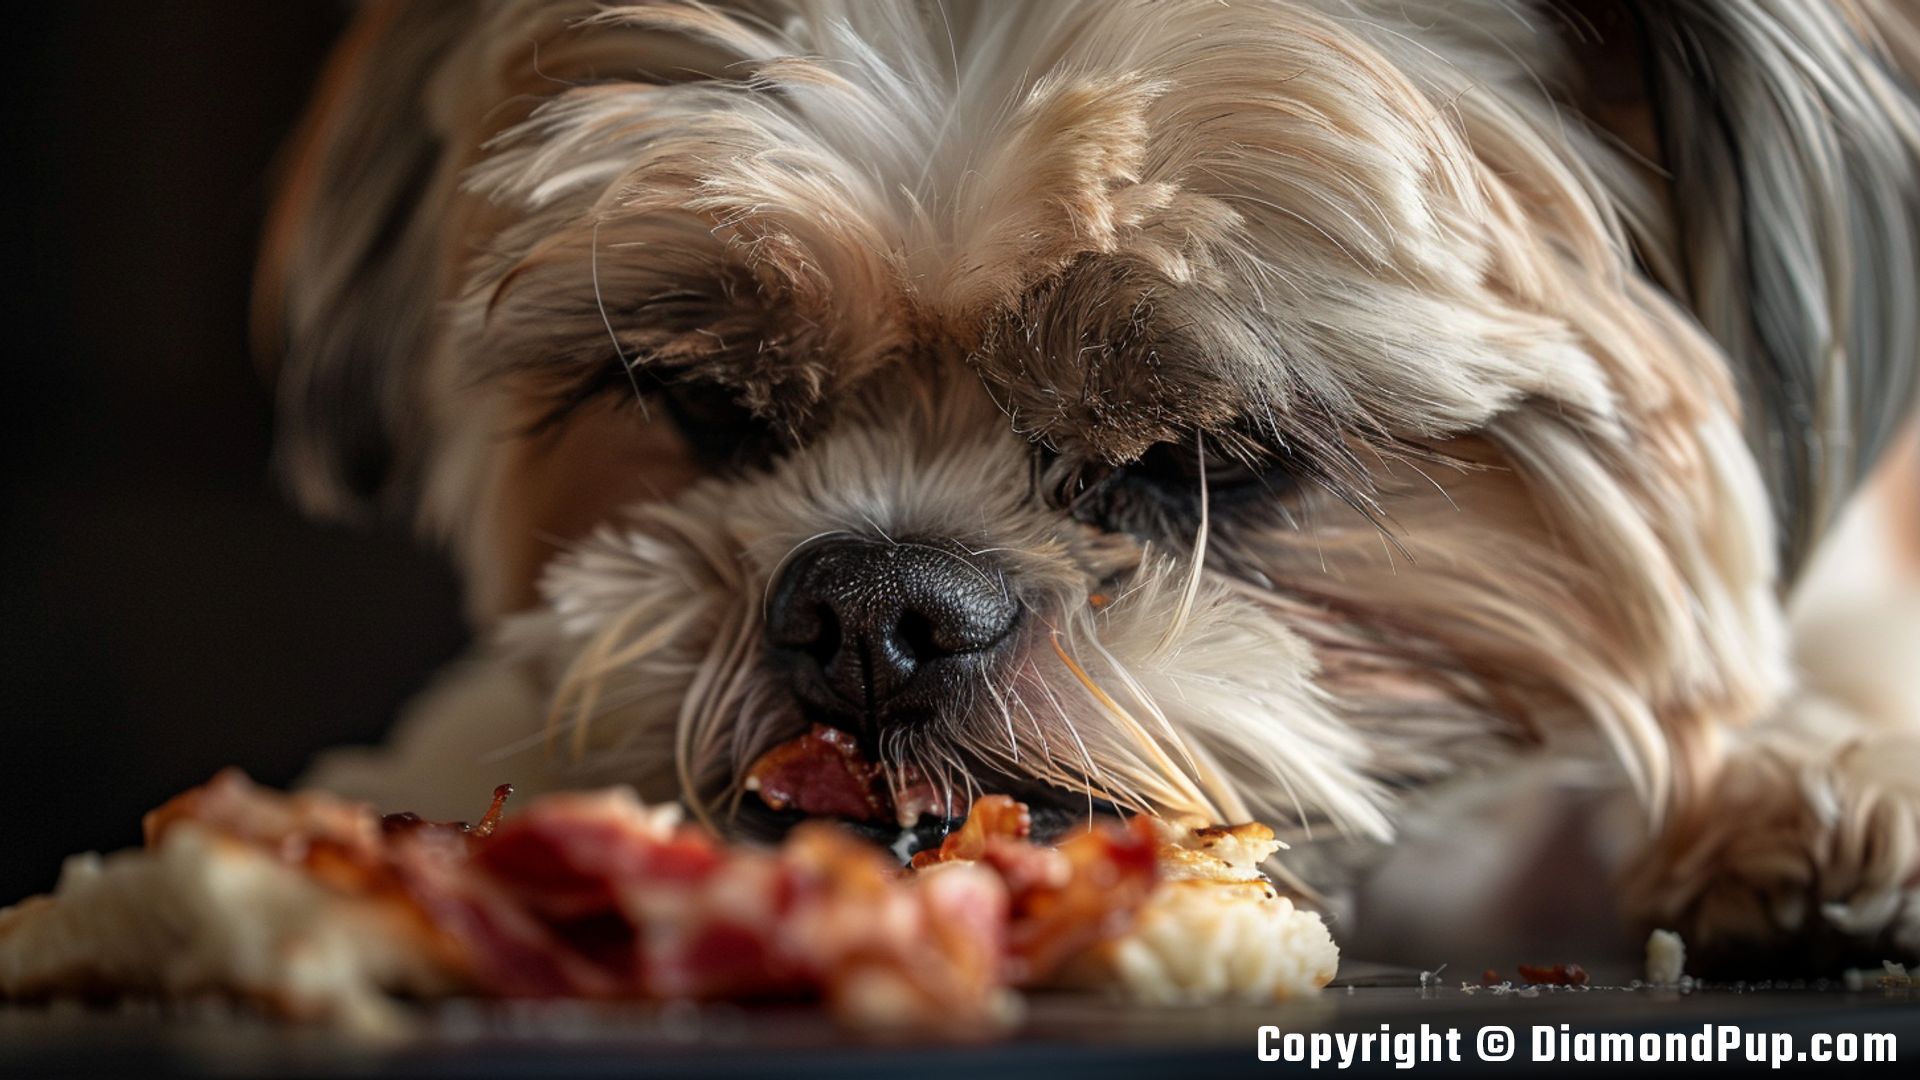 Image of a Playful Shih Tzu Snacking on Bacon